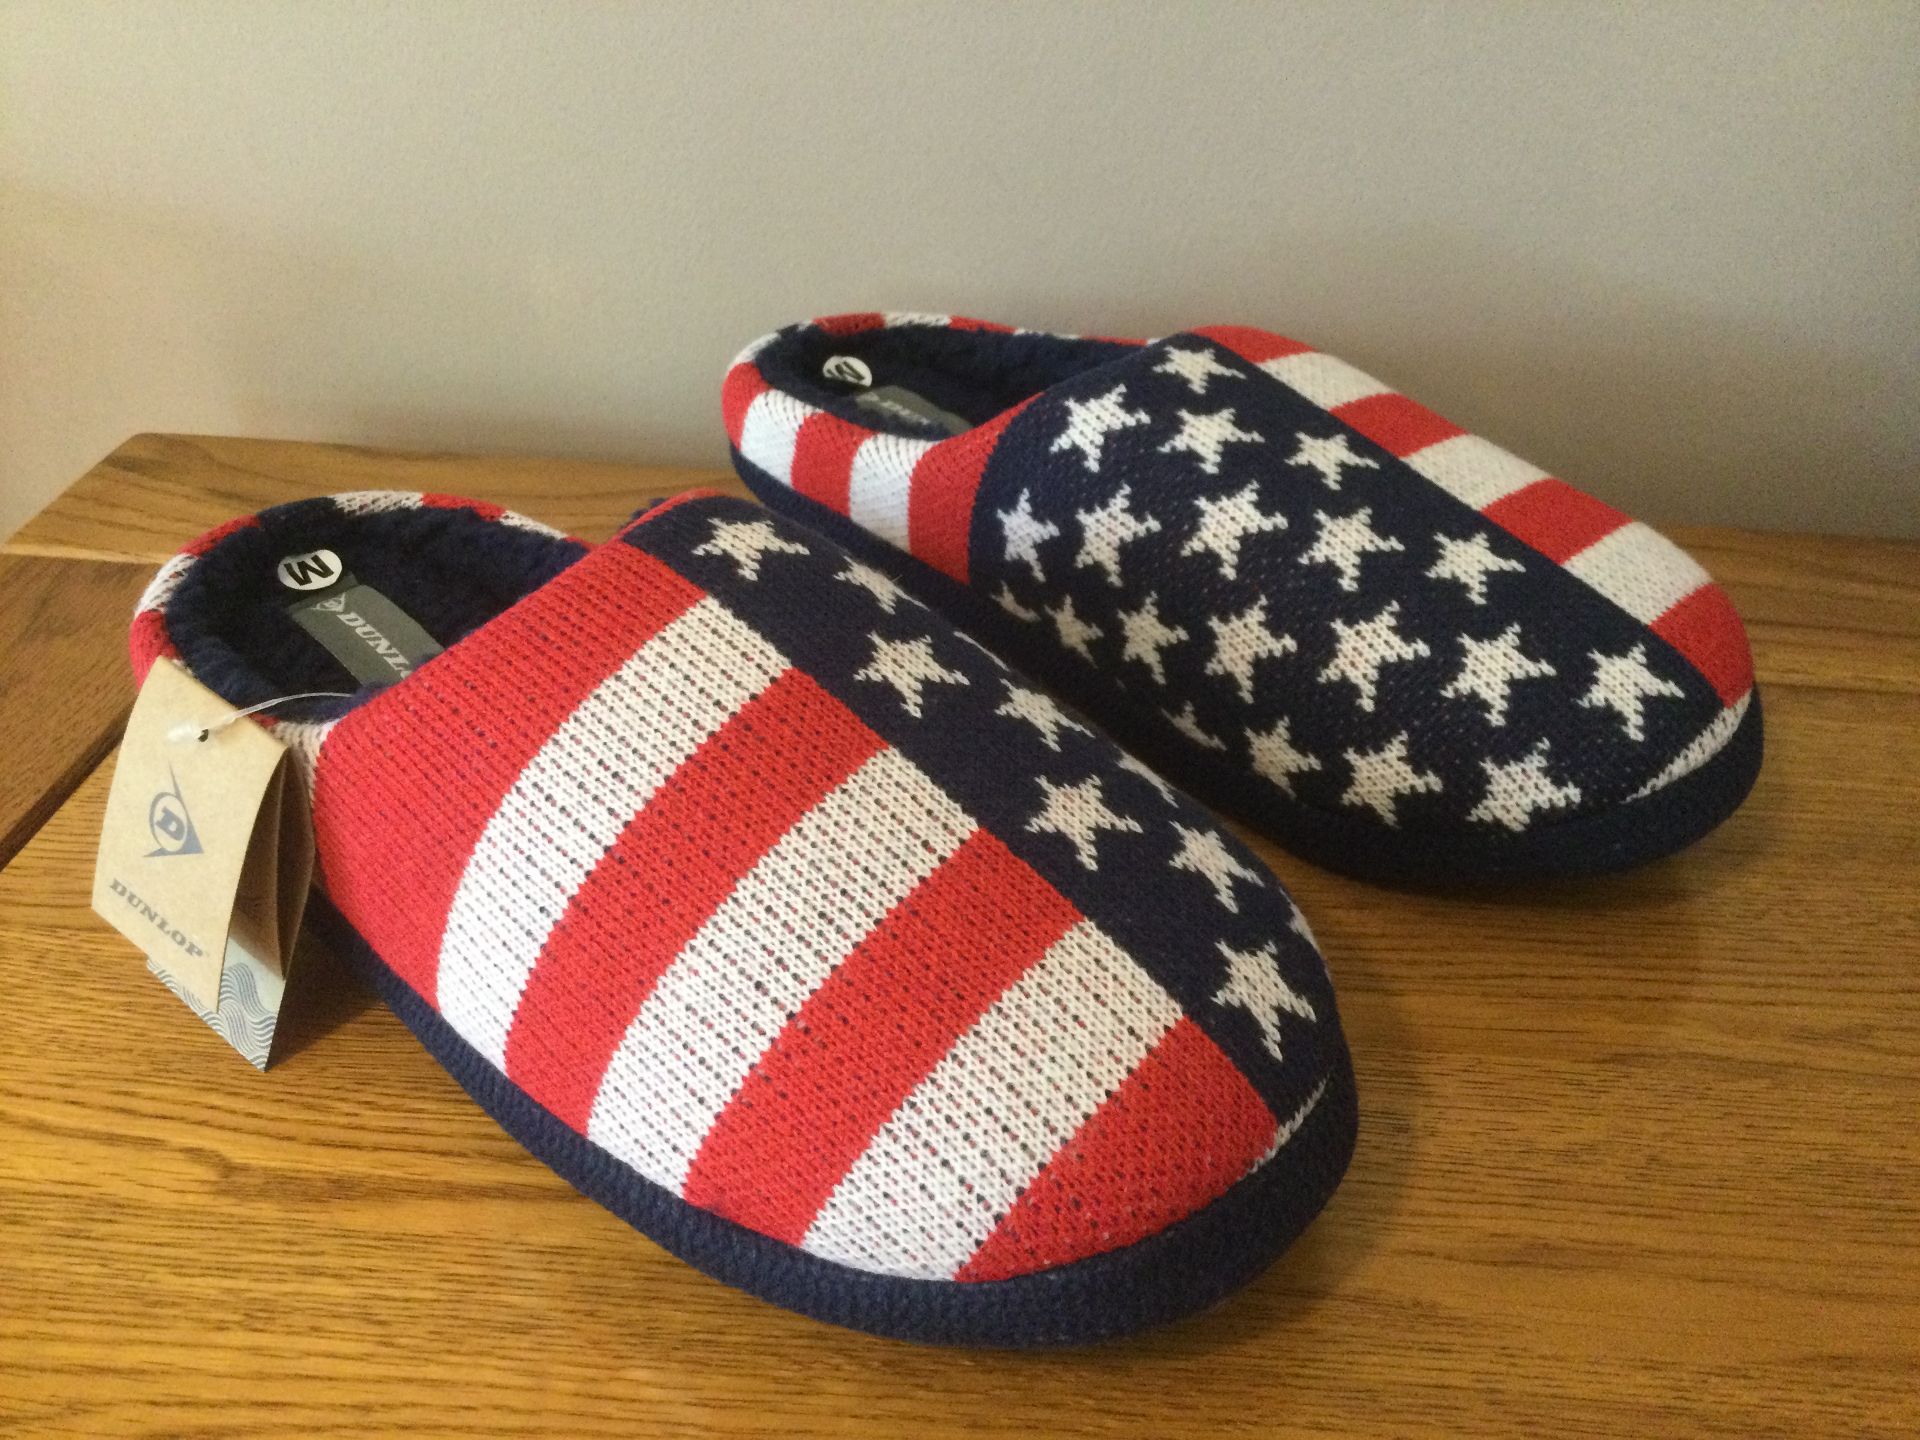 Men's Dunlop, “USA Stars and Stripes” Memory Foam, Mule Slippers, Size M (8/9) - New - Image 2 of 5